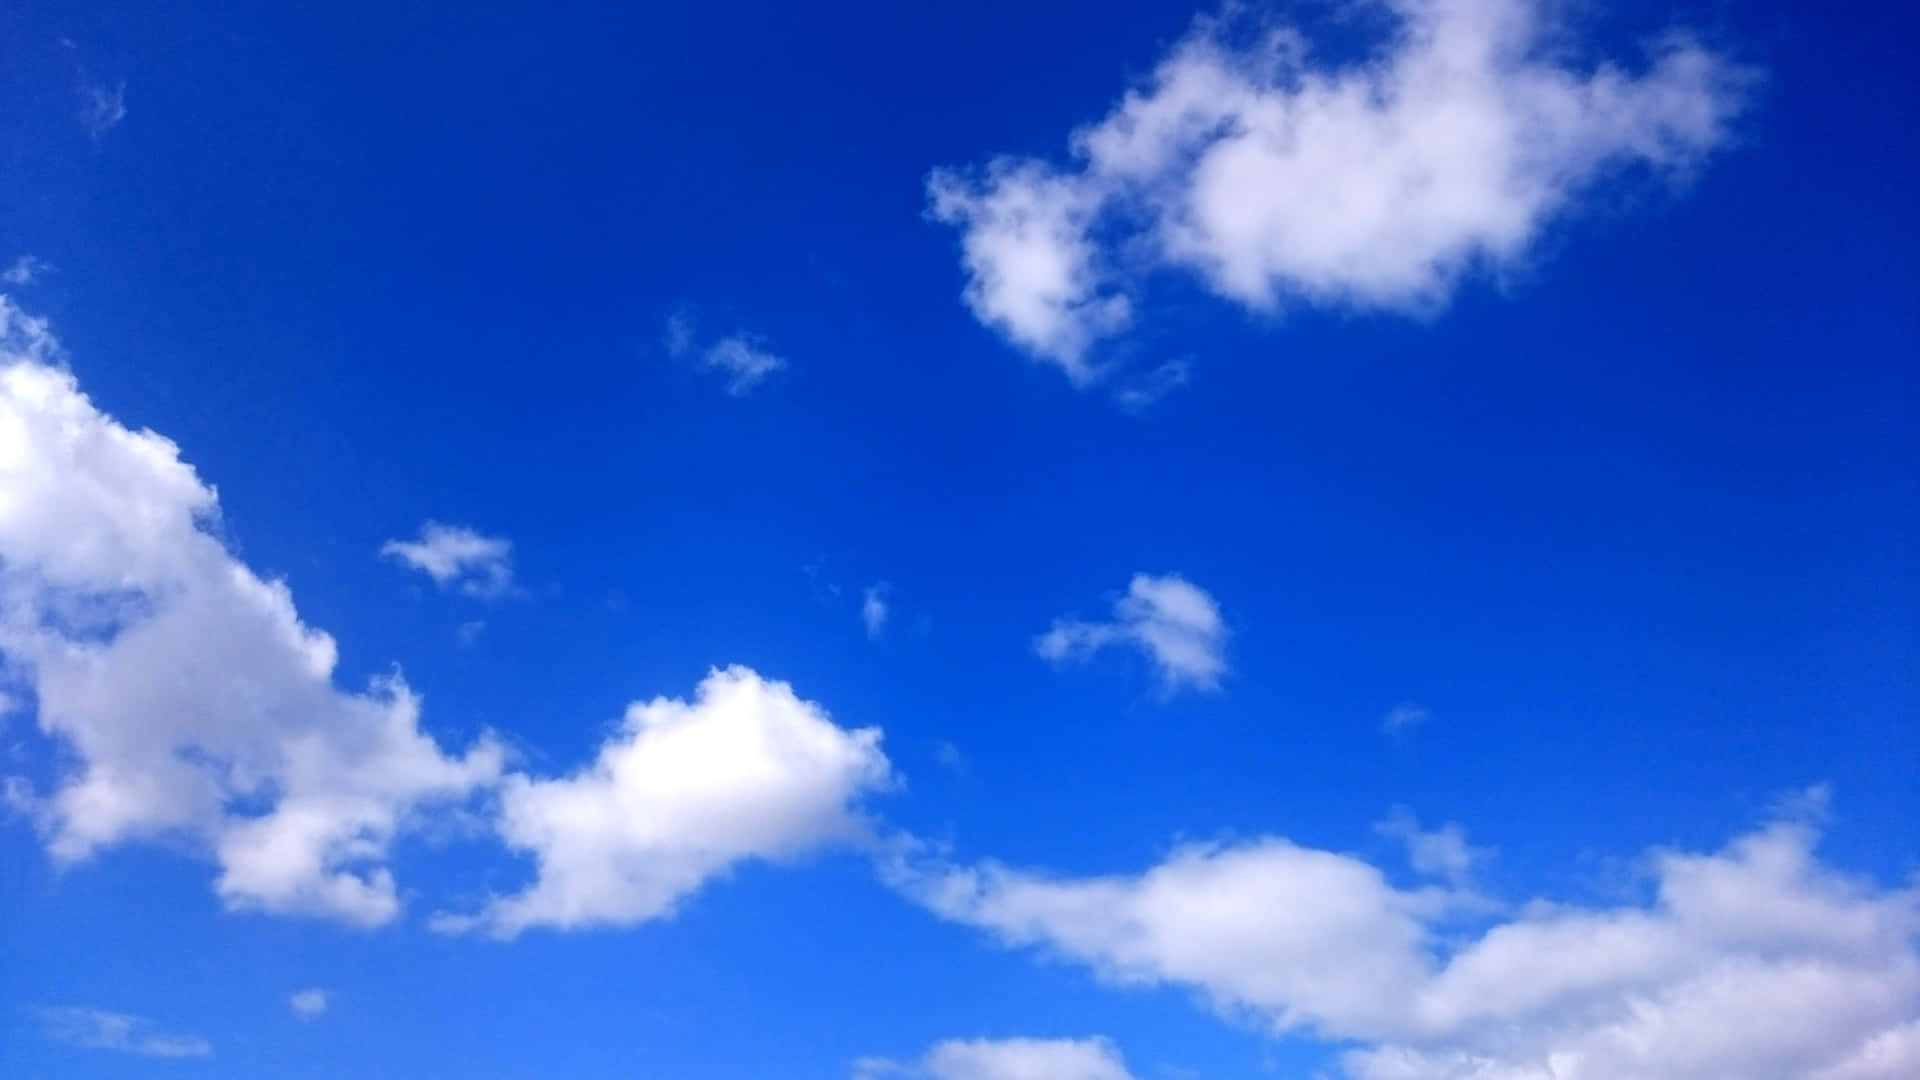 A Blue Sky With White Clouds And Blue Sky